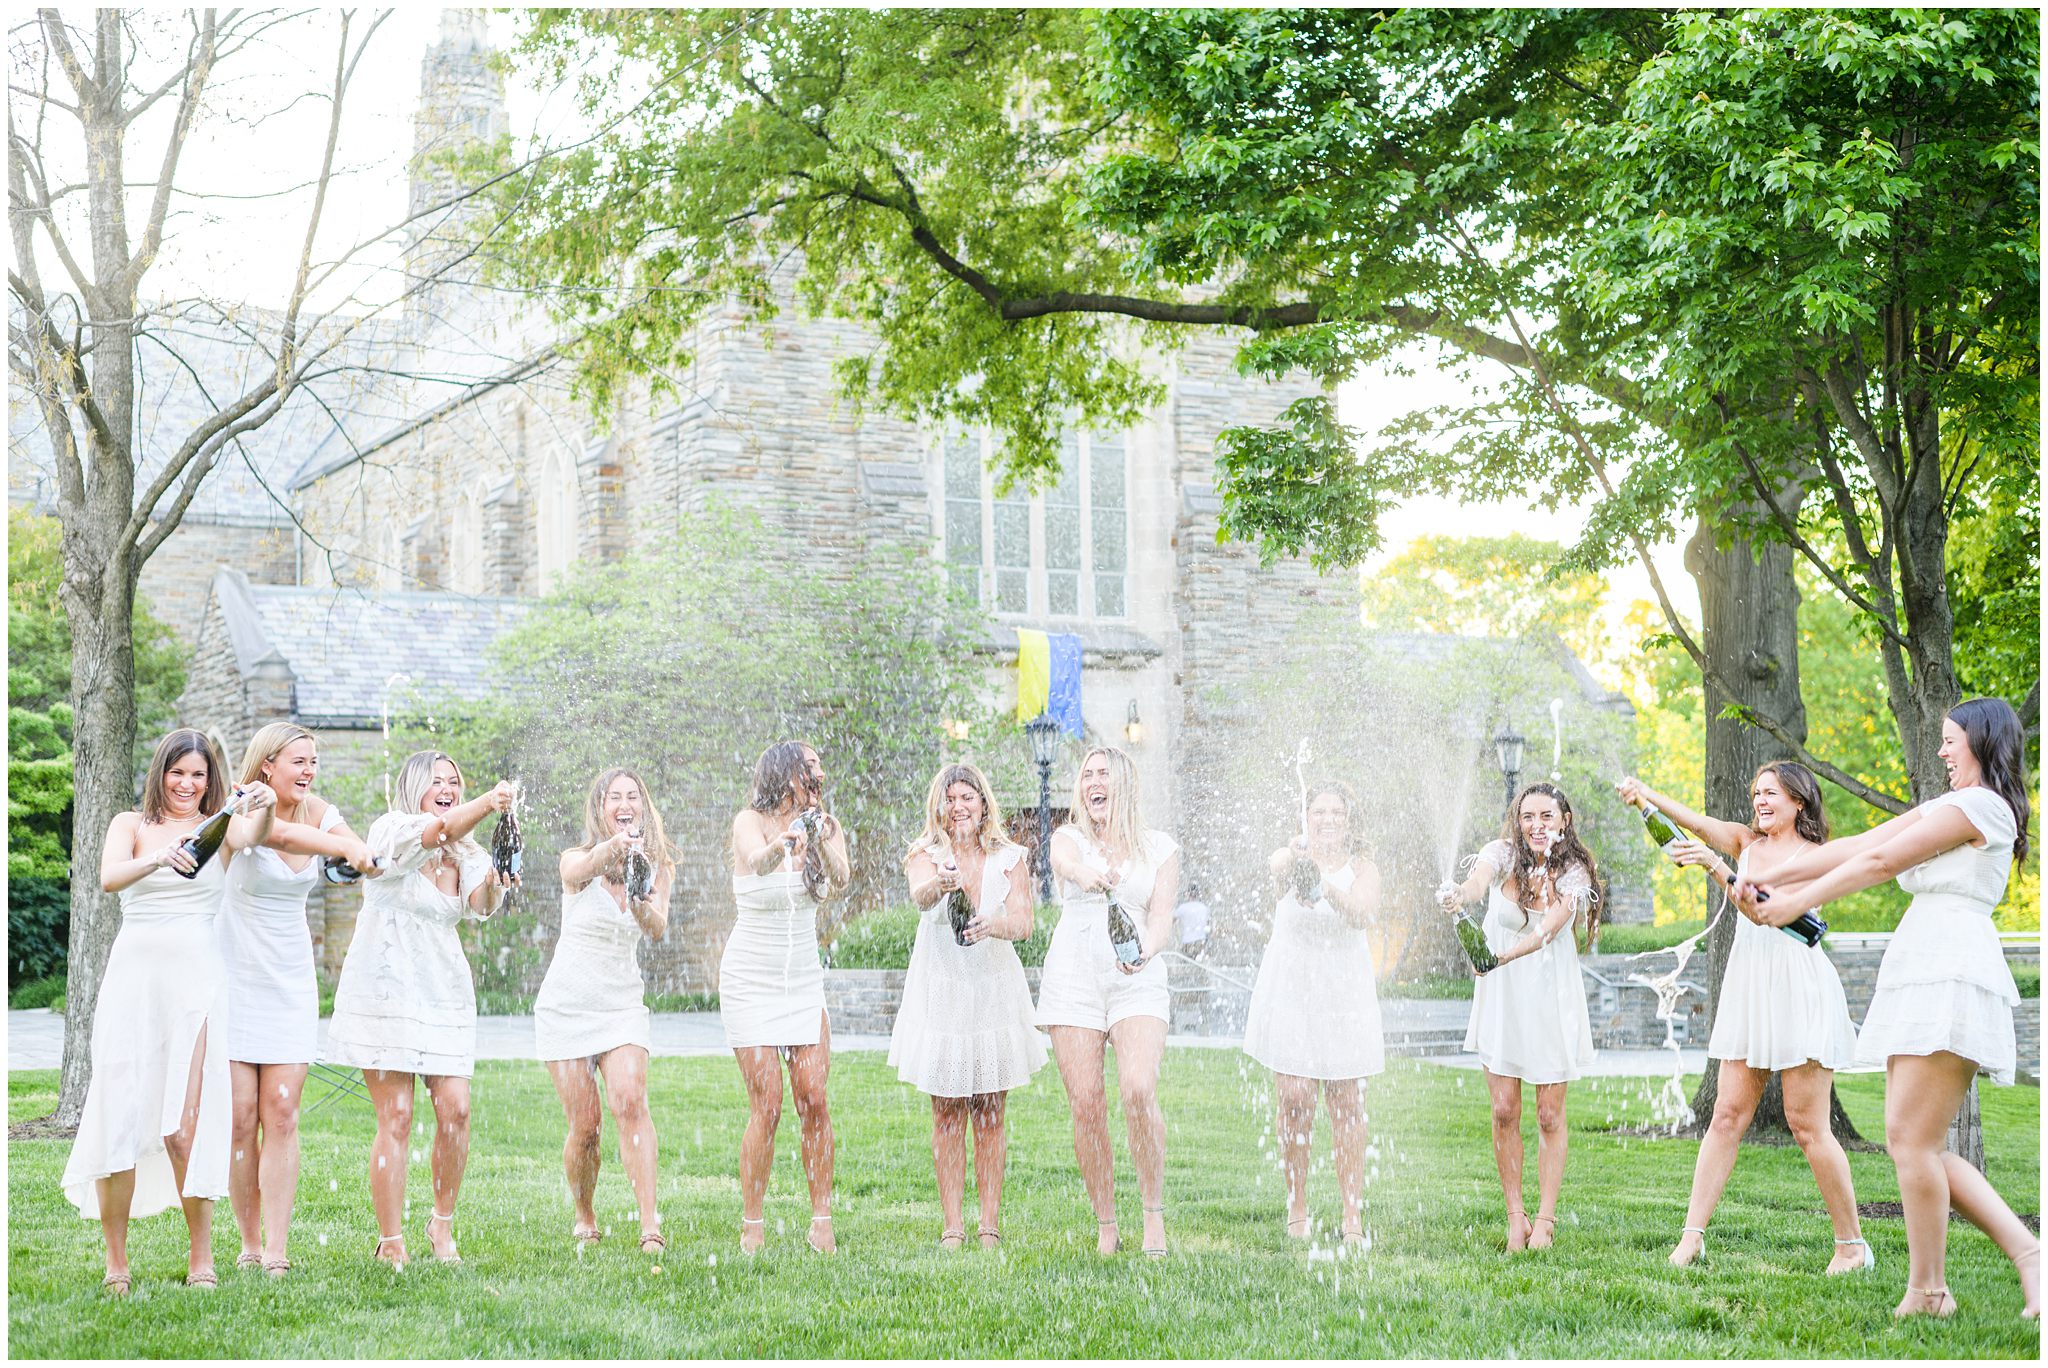 College graduates pop champagne bottles in white dresses photographed by Baltimore Photographer Cait Kramer